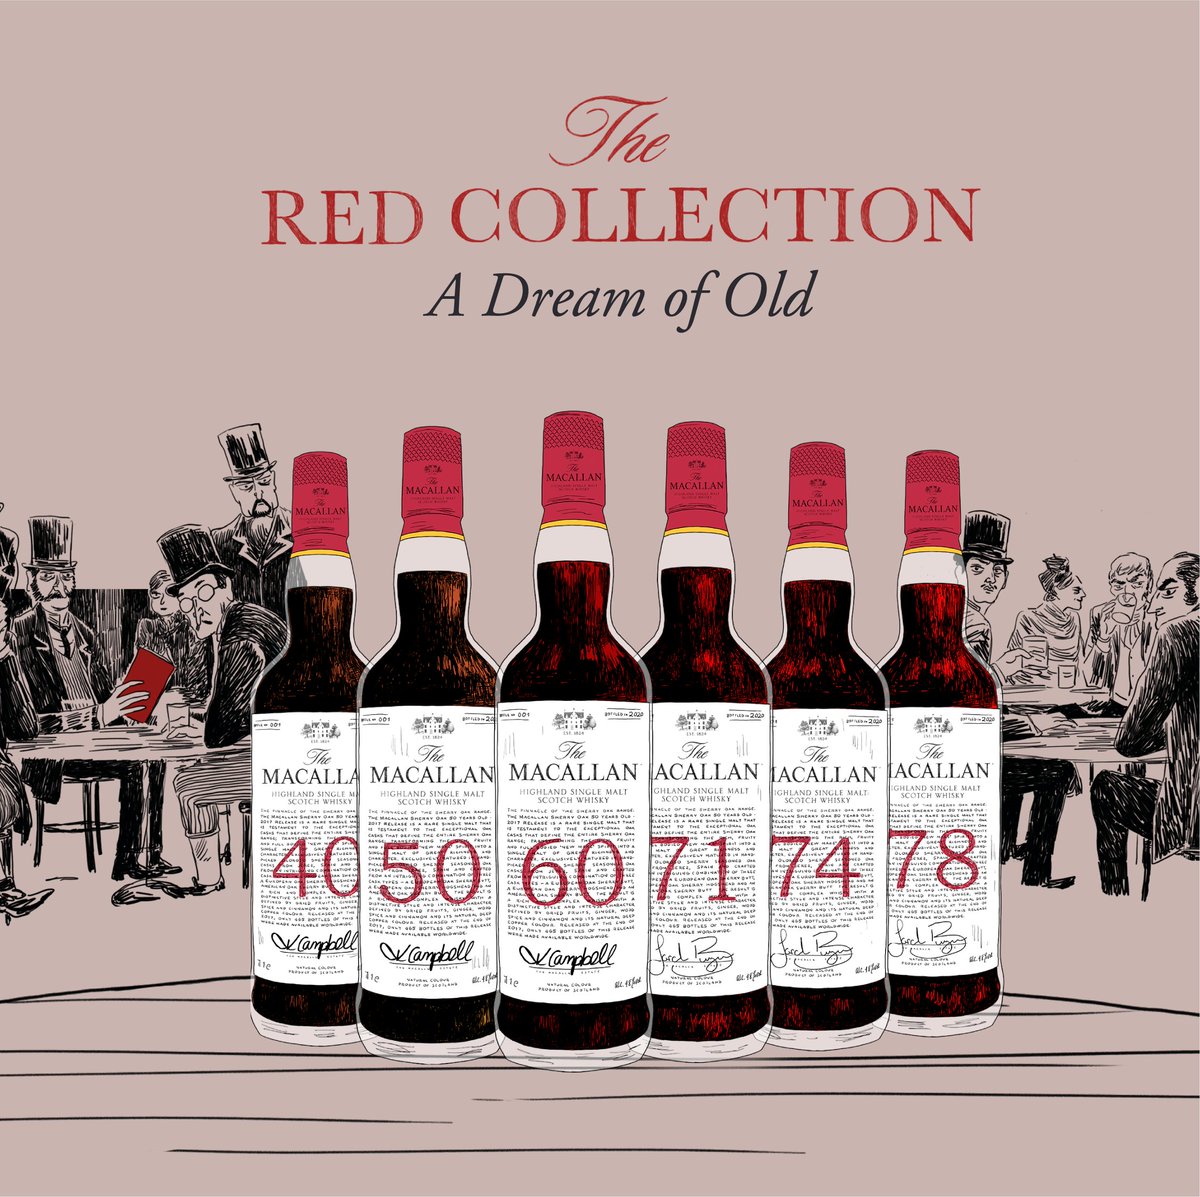 The Macallan On Twitter The Red Collection A Quest For Perfection Threaded In Red Features Ongoing Aged Expressions Of 40 50 And 60 Years Old As Well As Three High Aged Guest